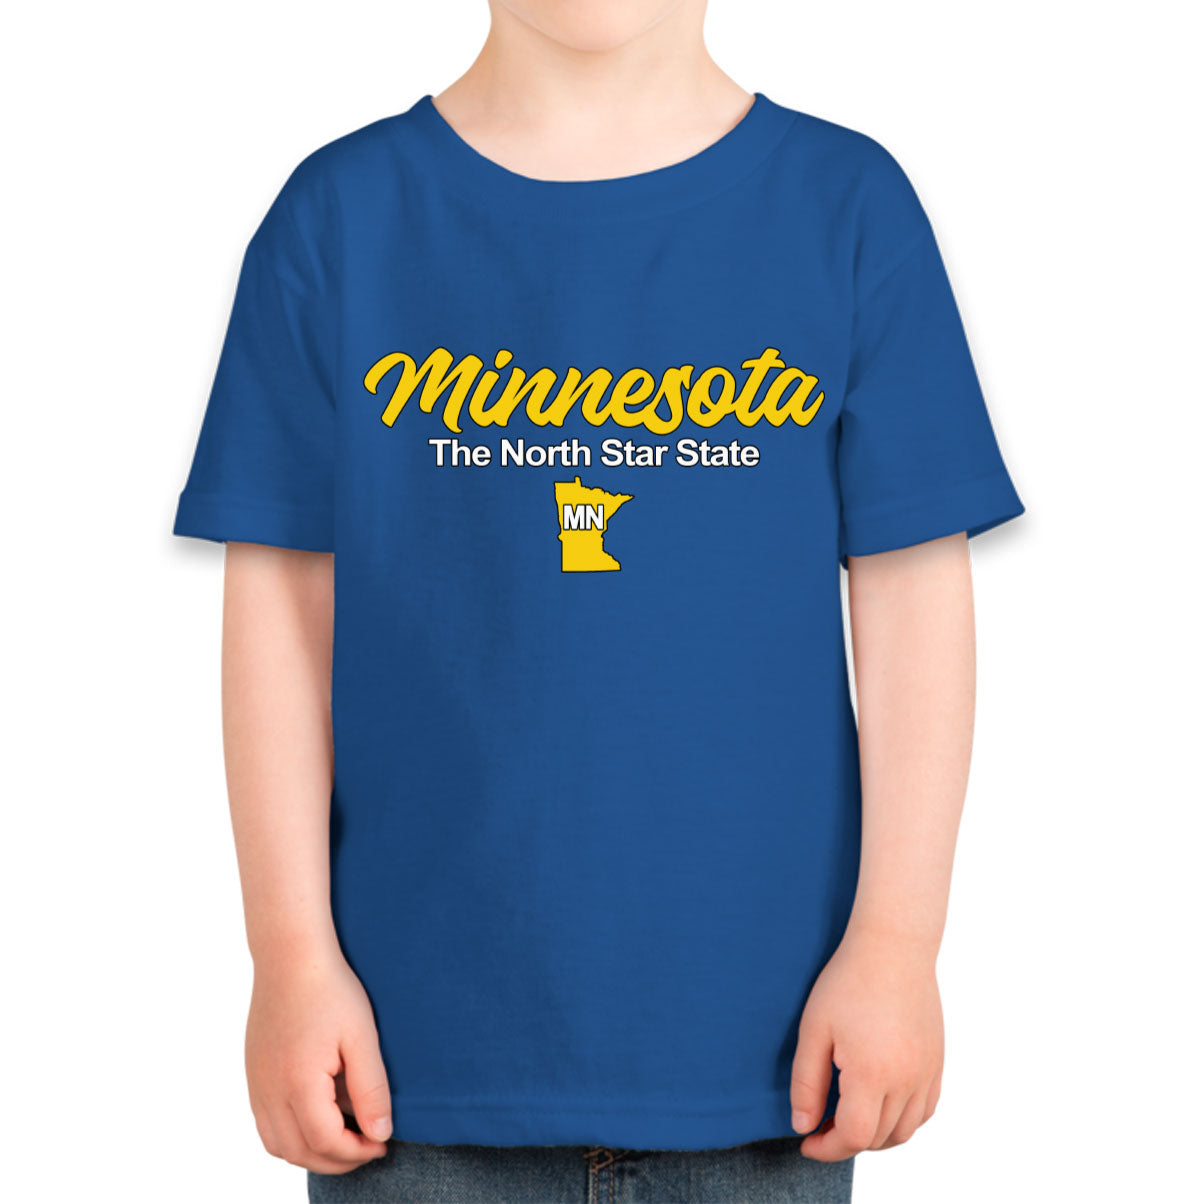 Minnesota The North Star State Toddler T-shirt